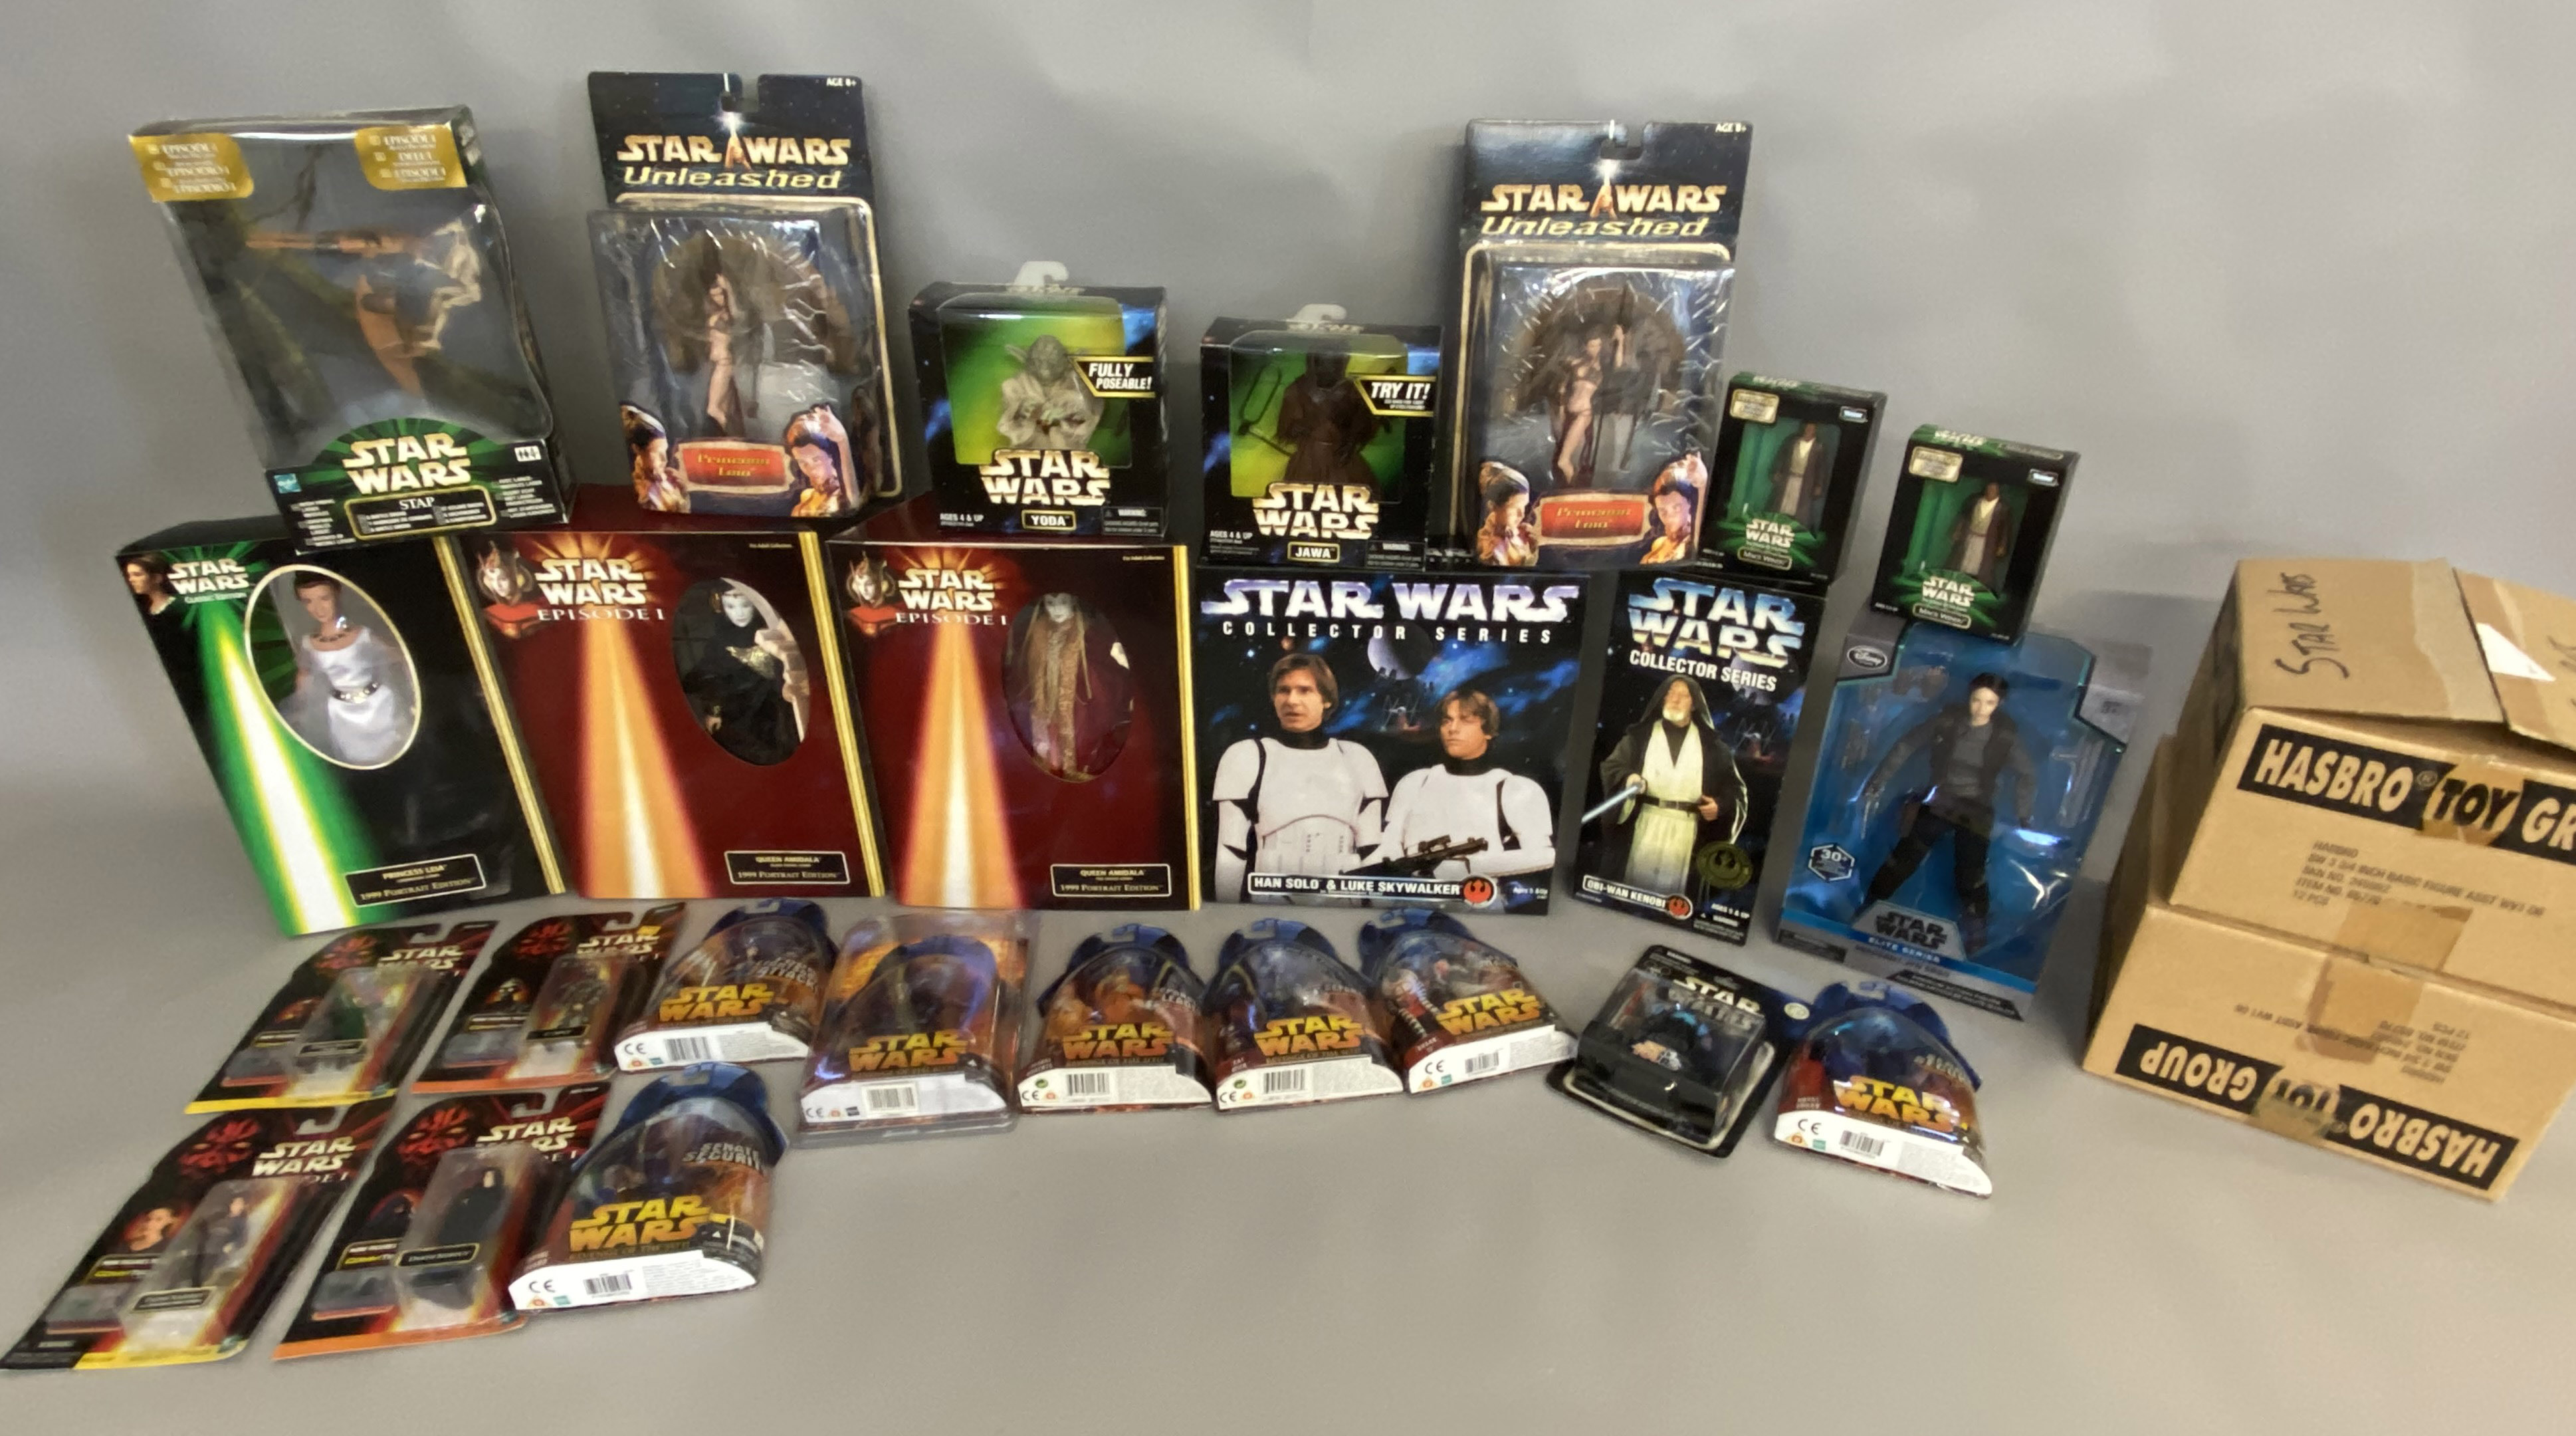 Approximately 40x assorted Star Wars boxed and carded figures including Collectors series, Revenge